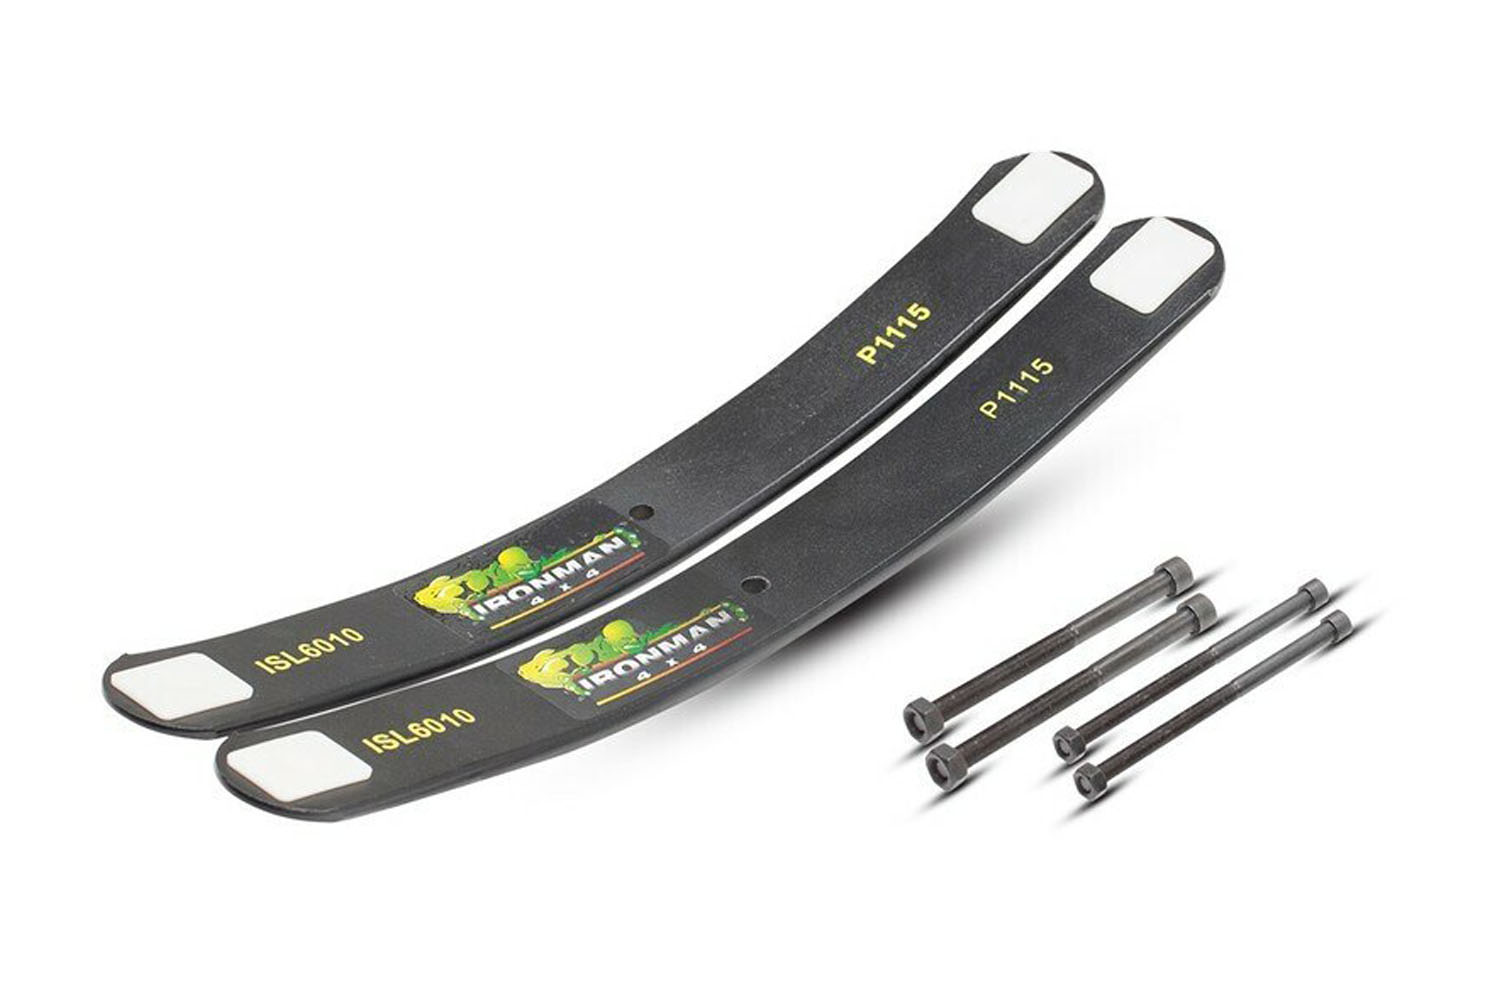 Add-A-Leaf Kit: Universal Tapered Leafs to Upgrade Existing Leaf Springs